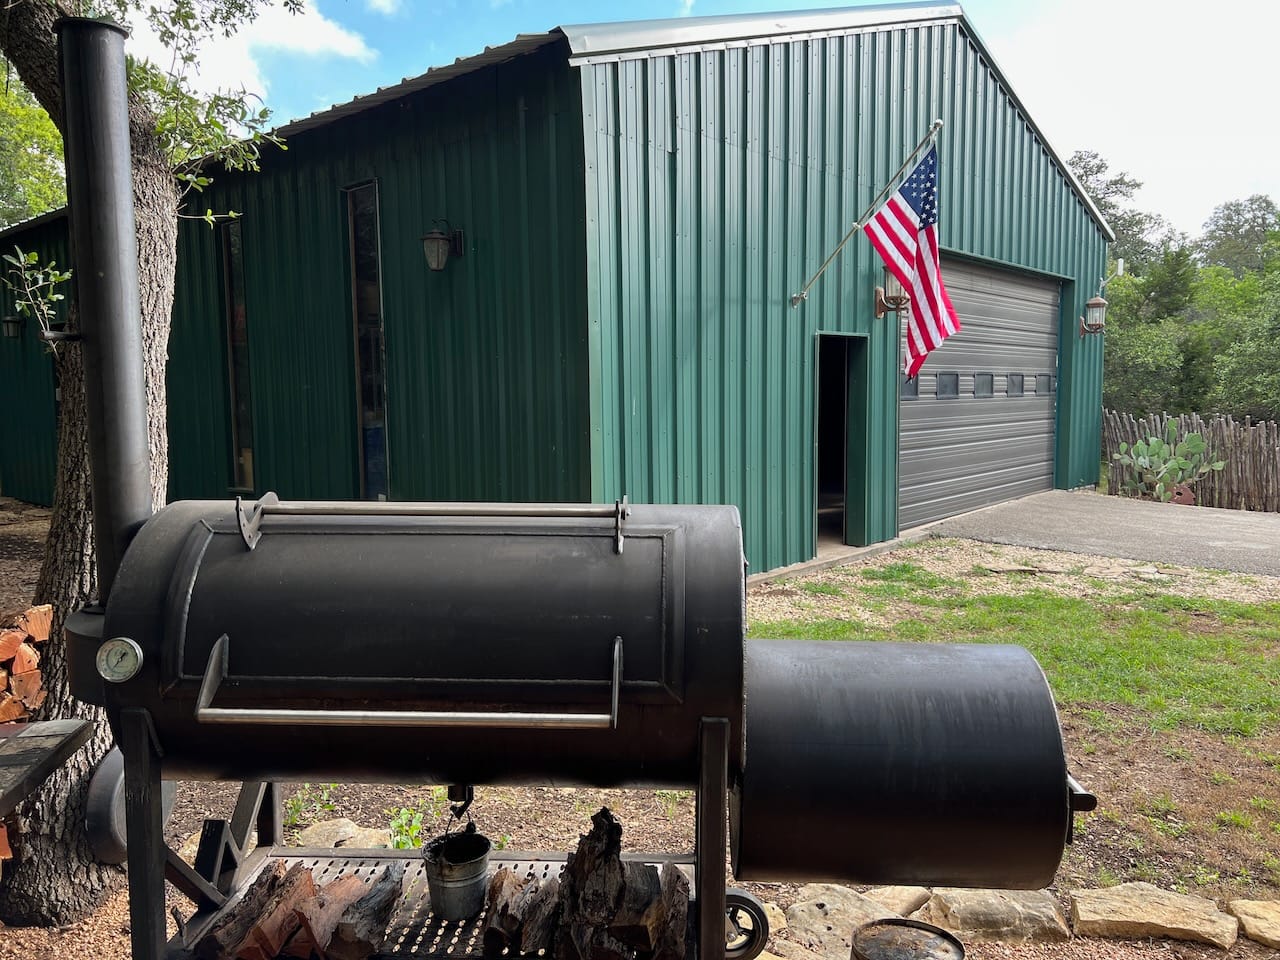 Mill Scale 94 offset smoker.